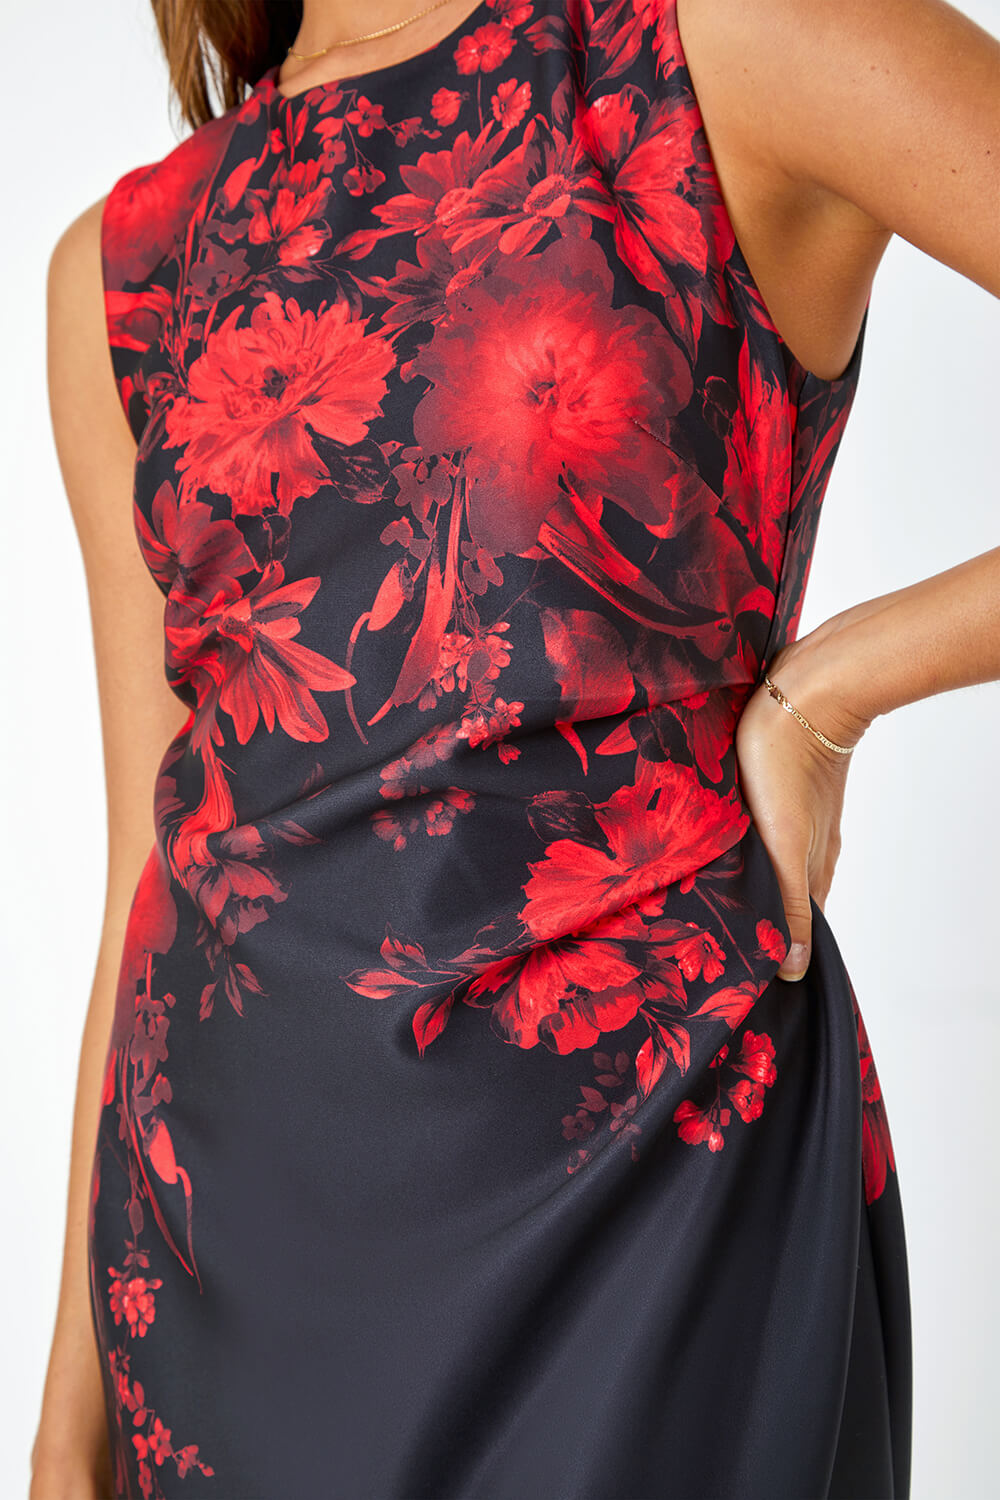  Floral Luxe Stretch Shift Dress, Image 5 of 5